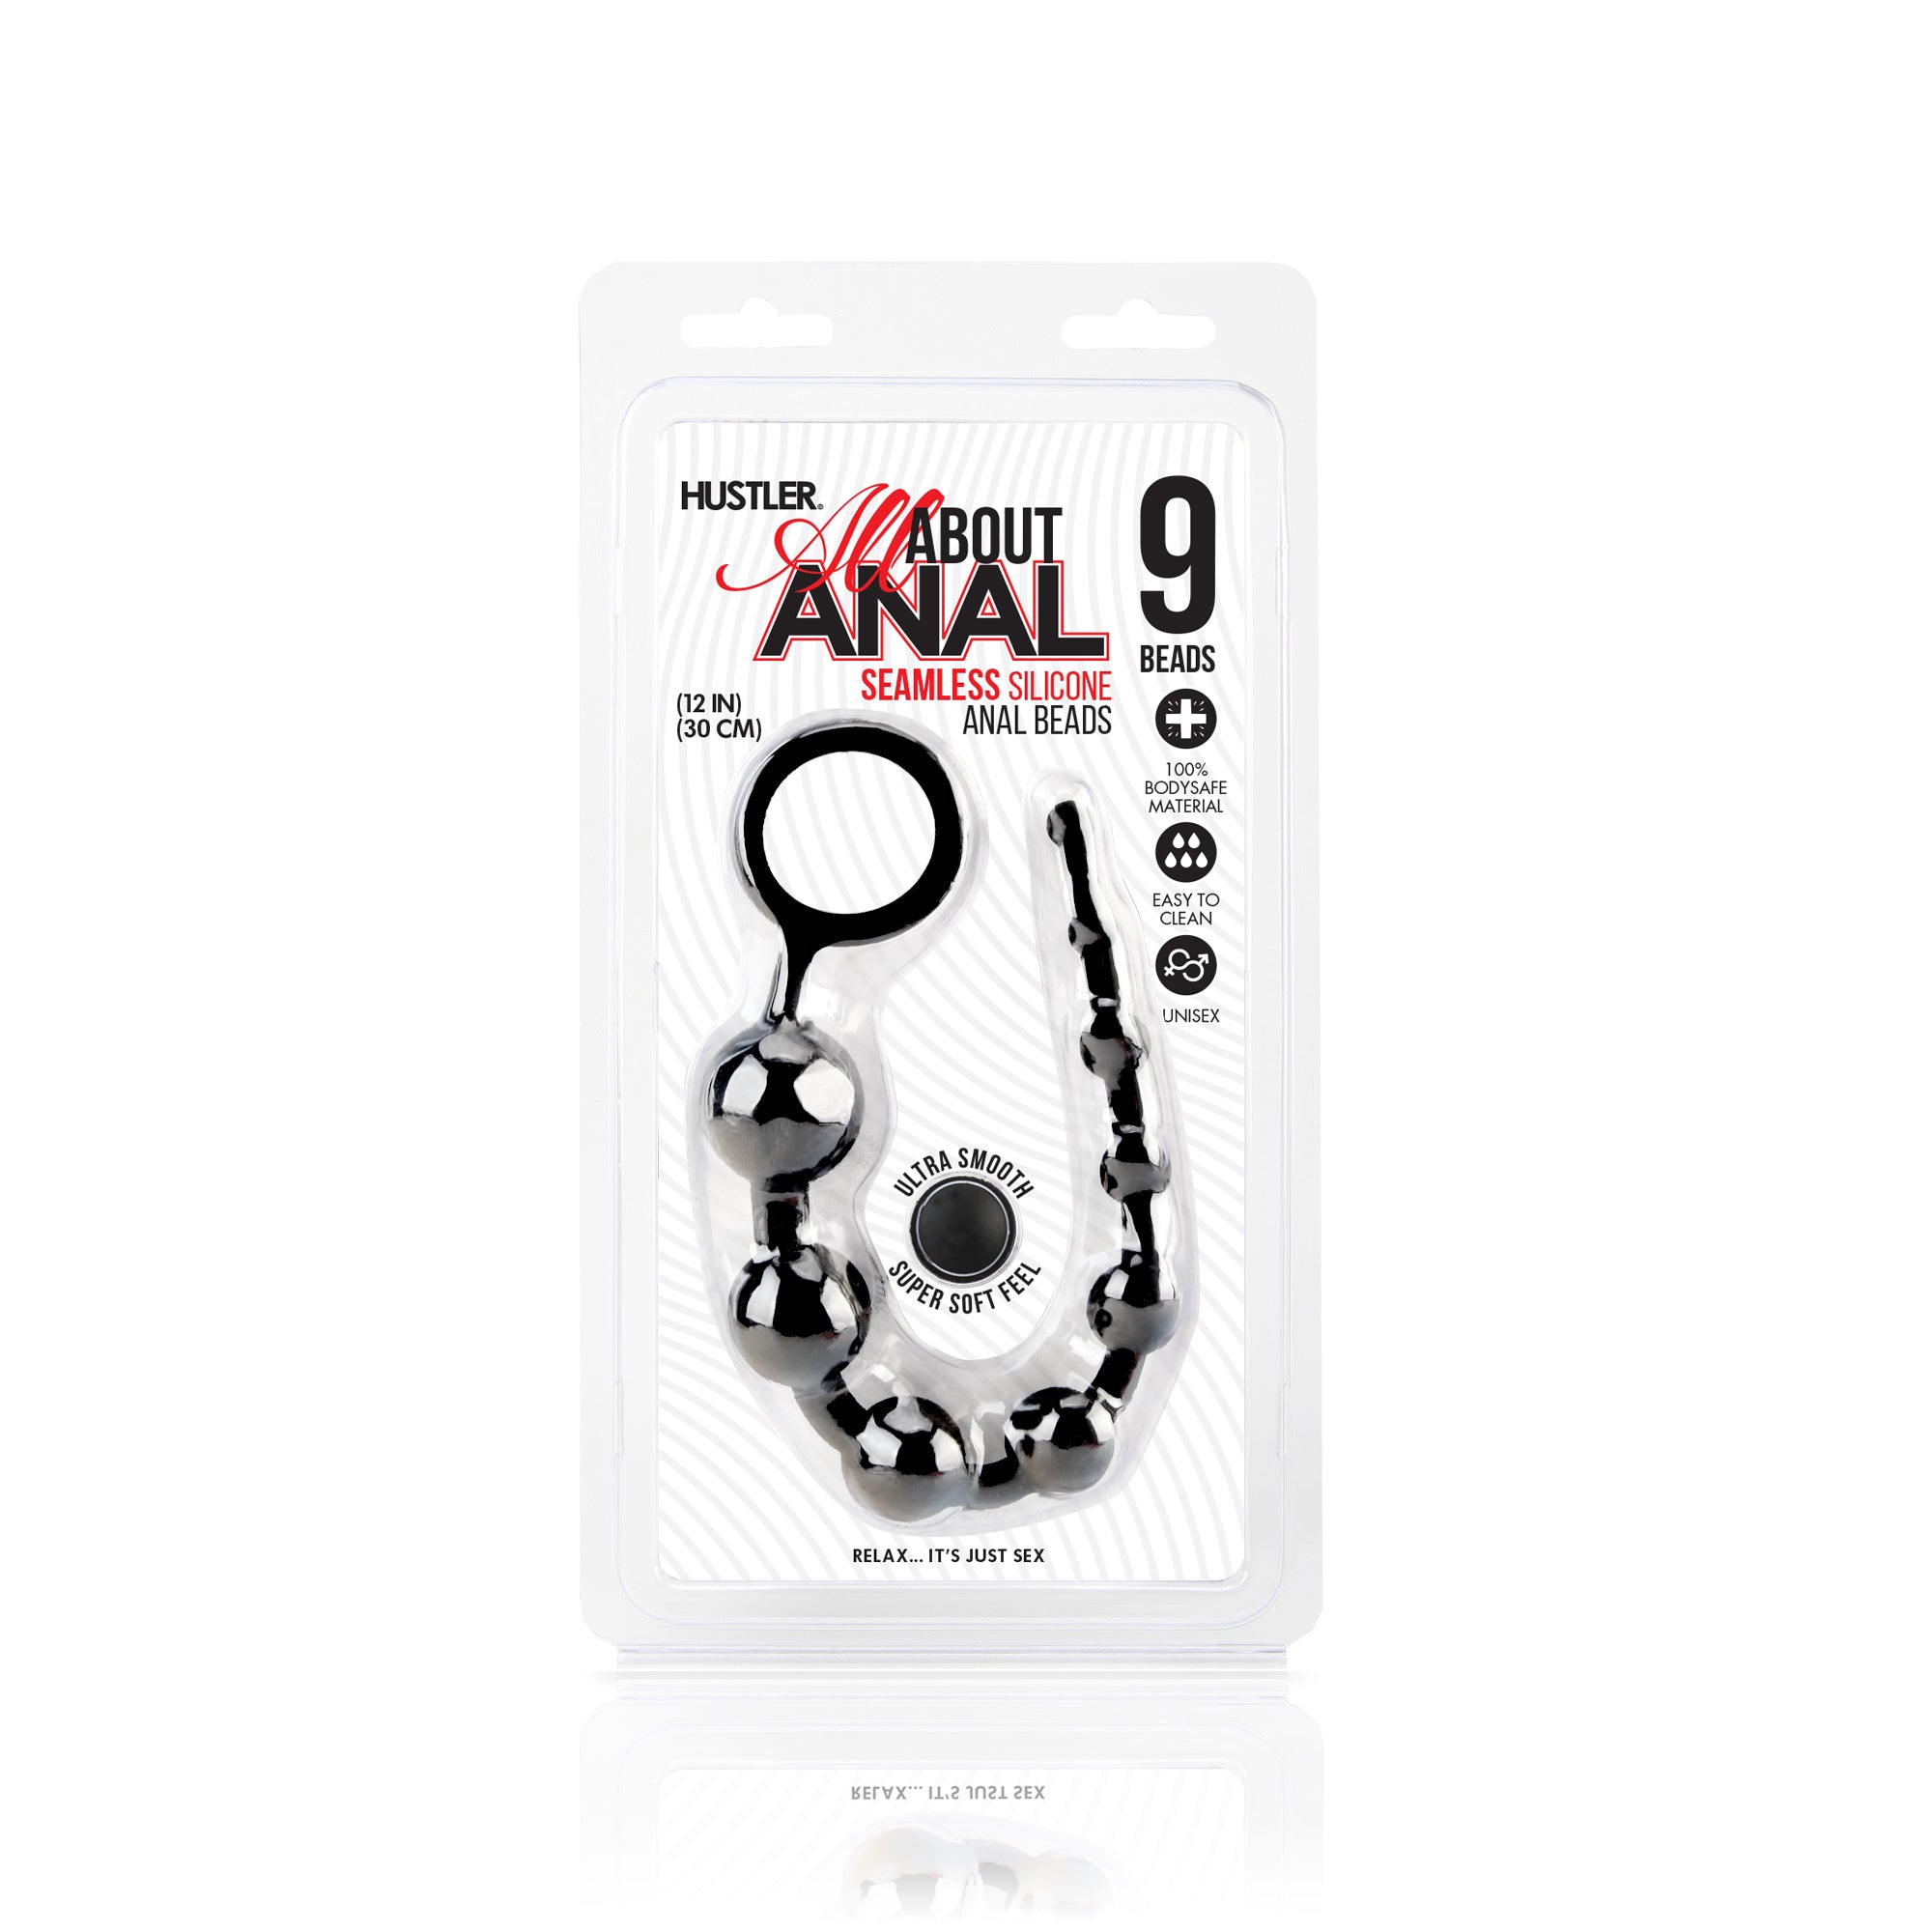 Packaging of Hustler Body-Safe Silicone Anal Beads (9 Beads) in Black at glastoy.com